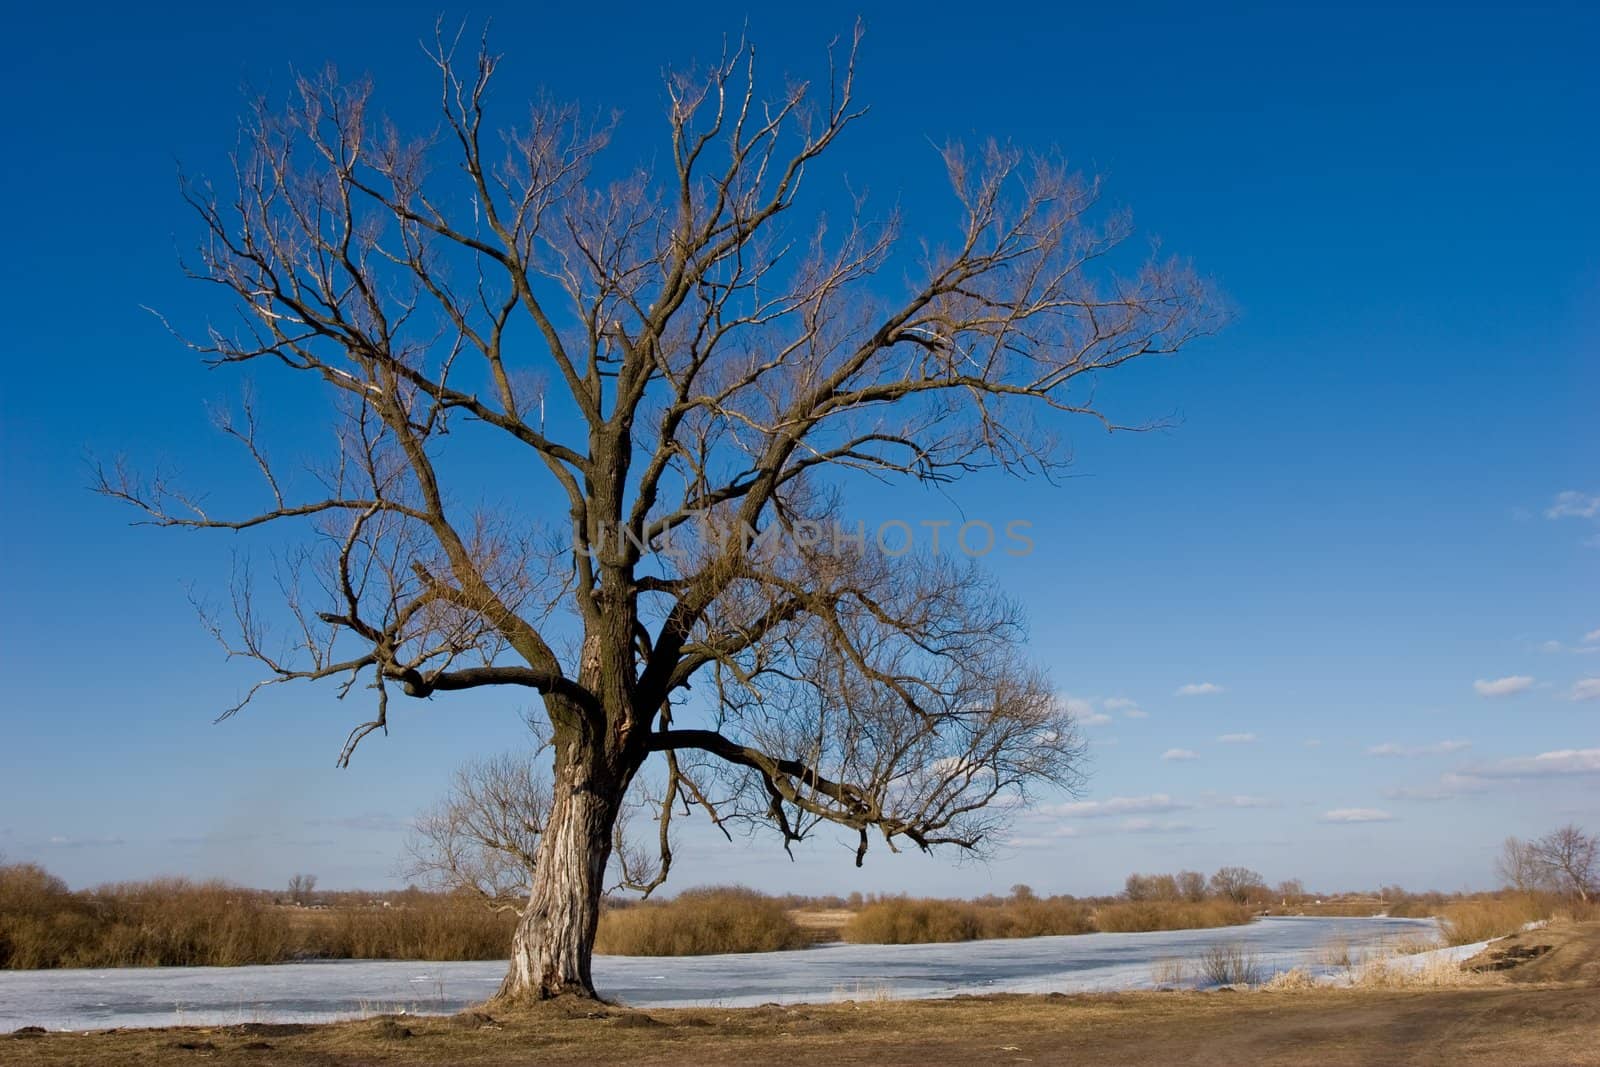 view series: rural early spring landscape with tree